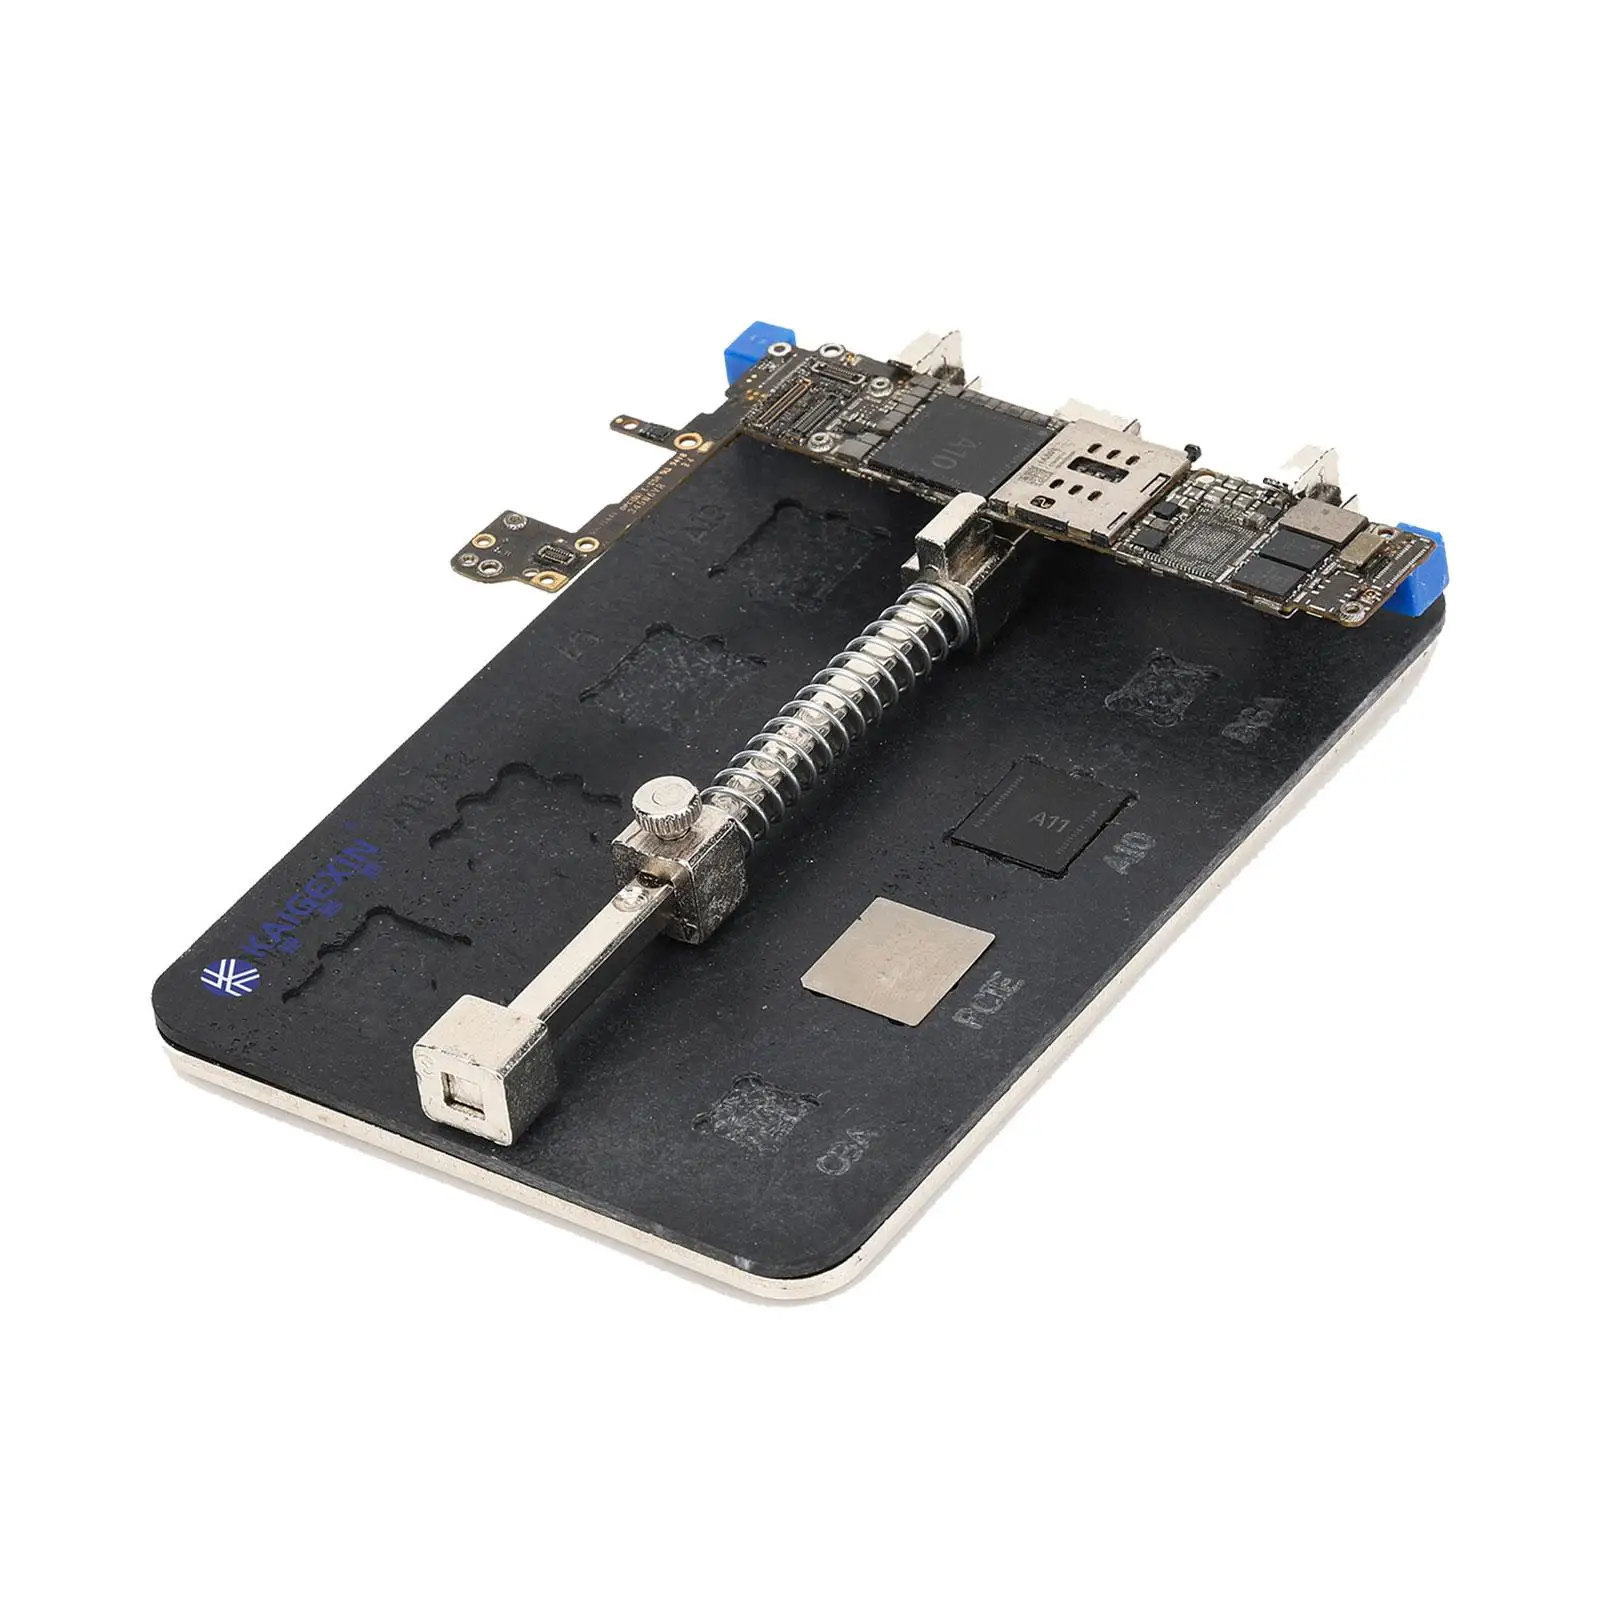 Phone Circuit Board Clamp Holder Accessory for Phone Motherboard Soldering